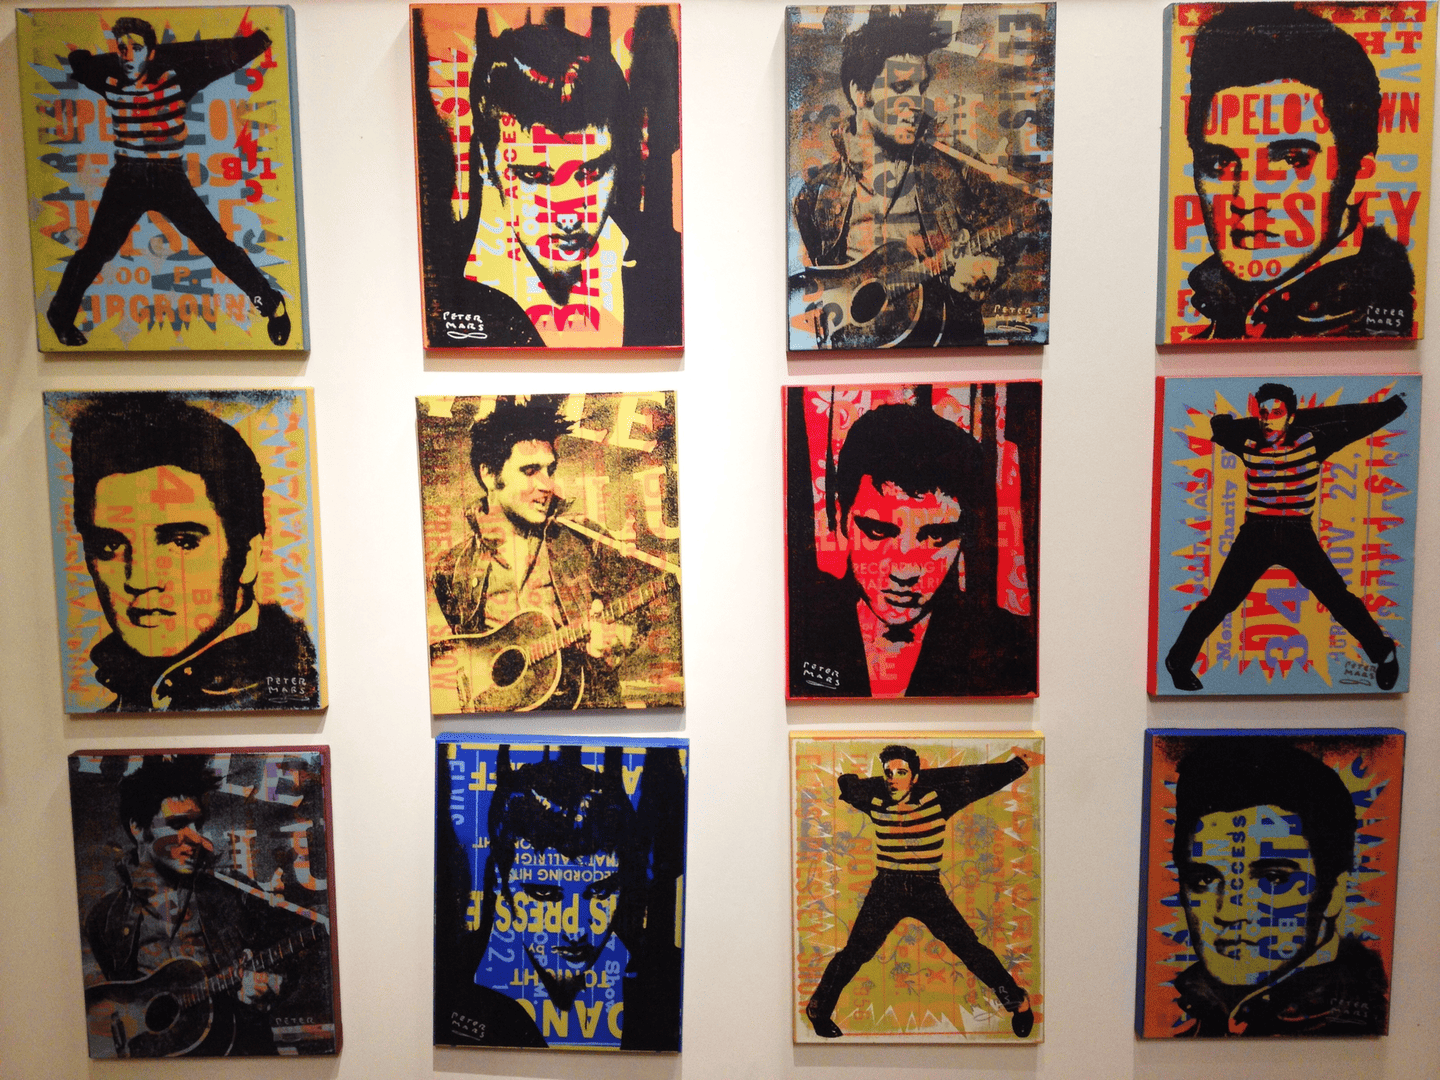 The Elvis version of posters.